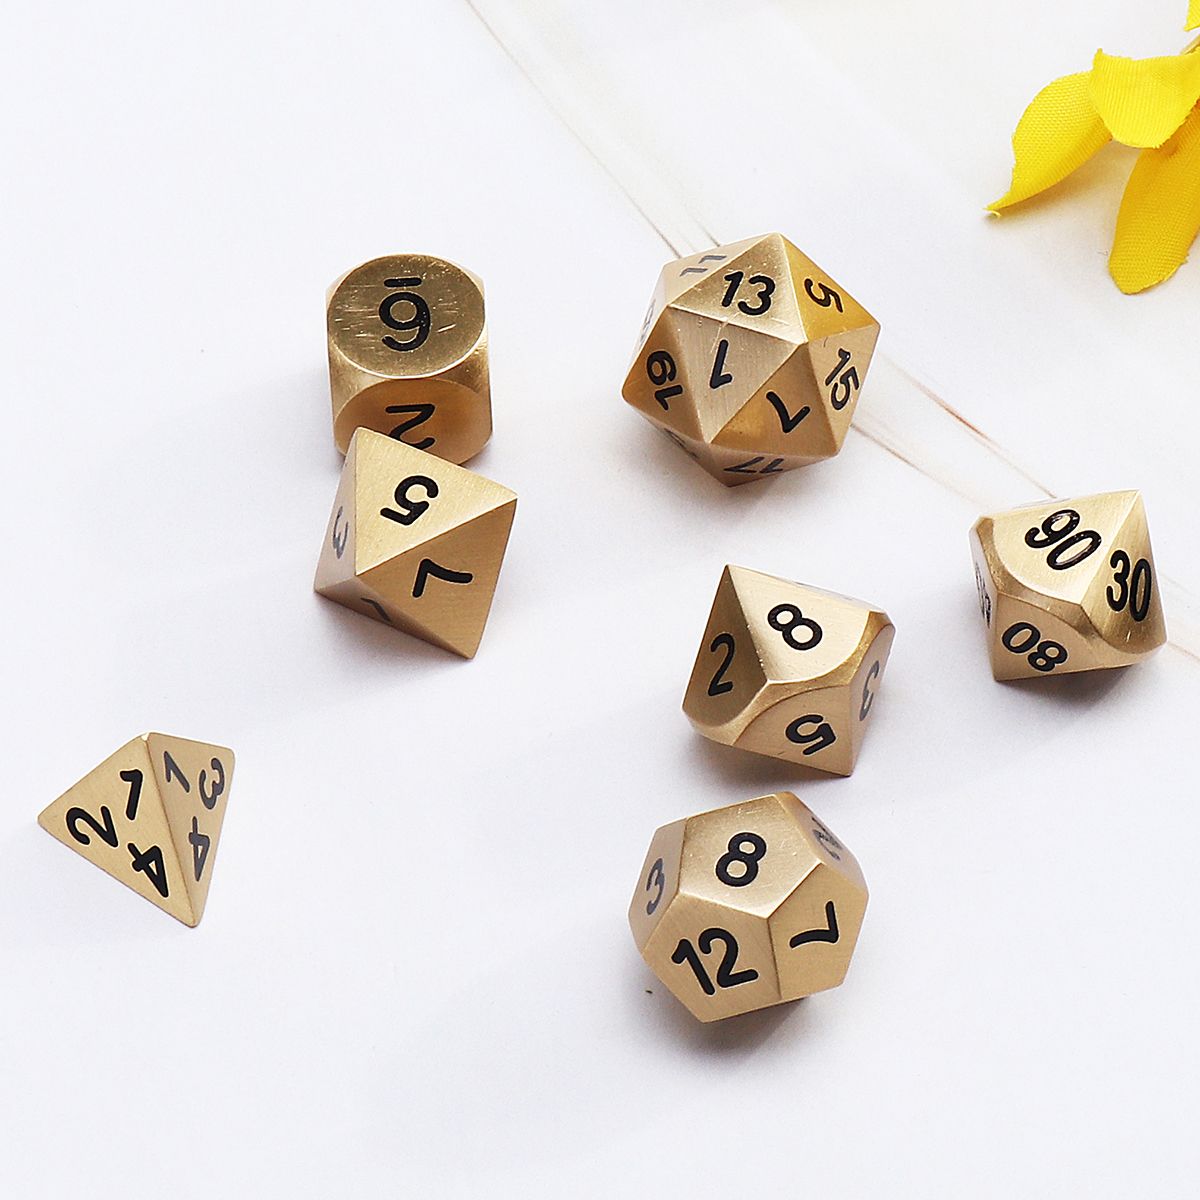 Pure-Copper-Polyhedral-Dices-Set-Metal-Role-Playing-Game-Dice-Gadget-for-Dungeons-Dragon-Games-Gift-1608120